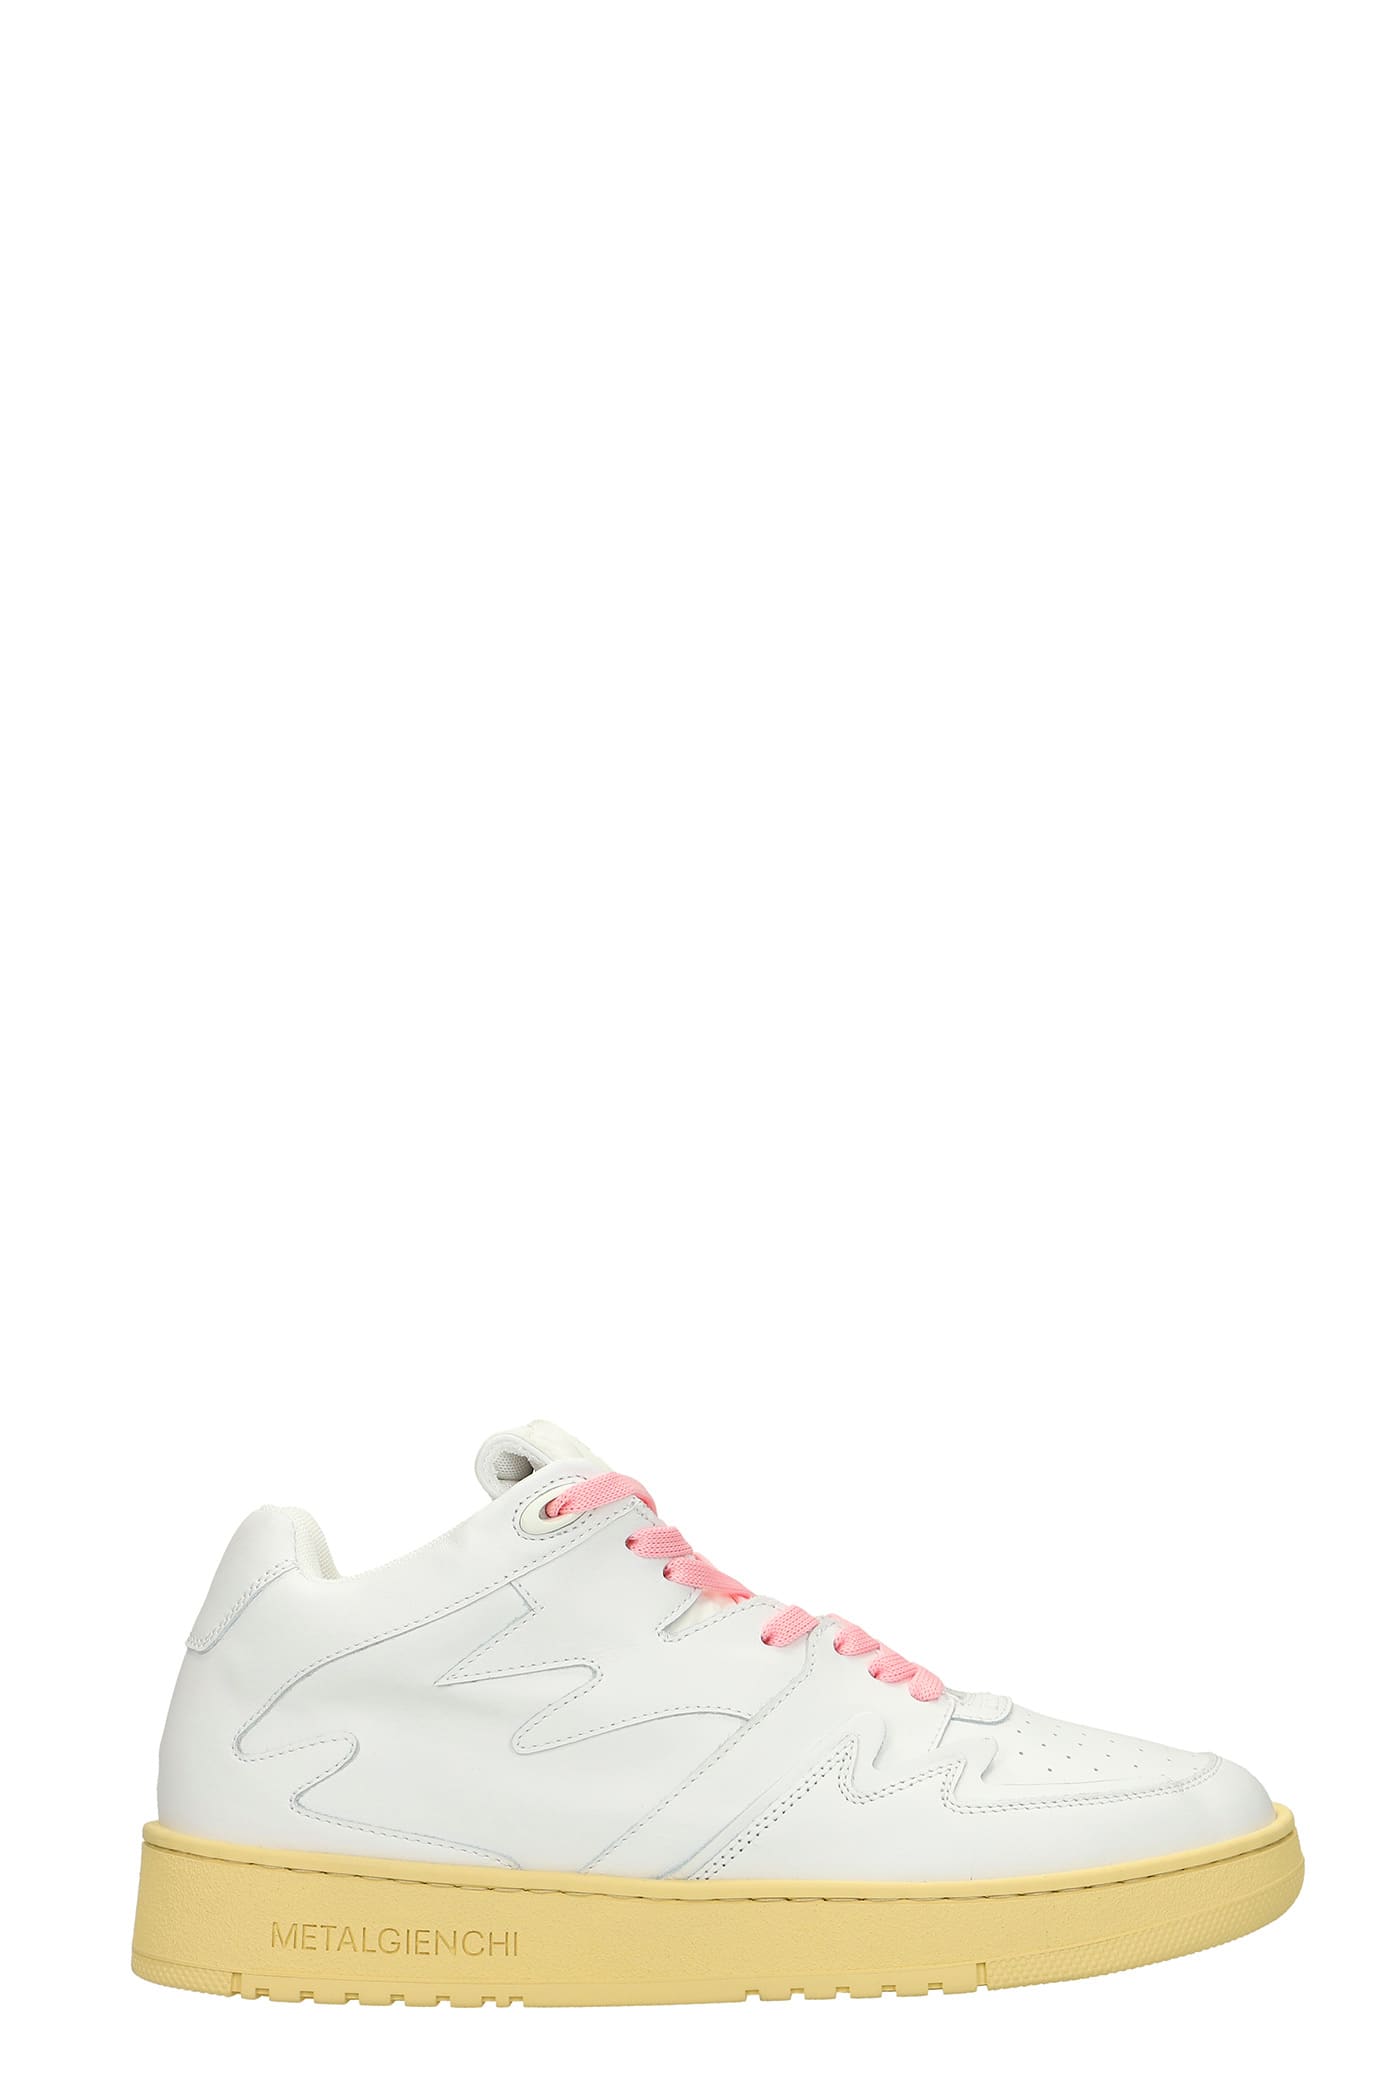 Gienchi Neon Sneakers In White Leather